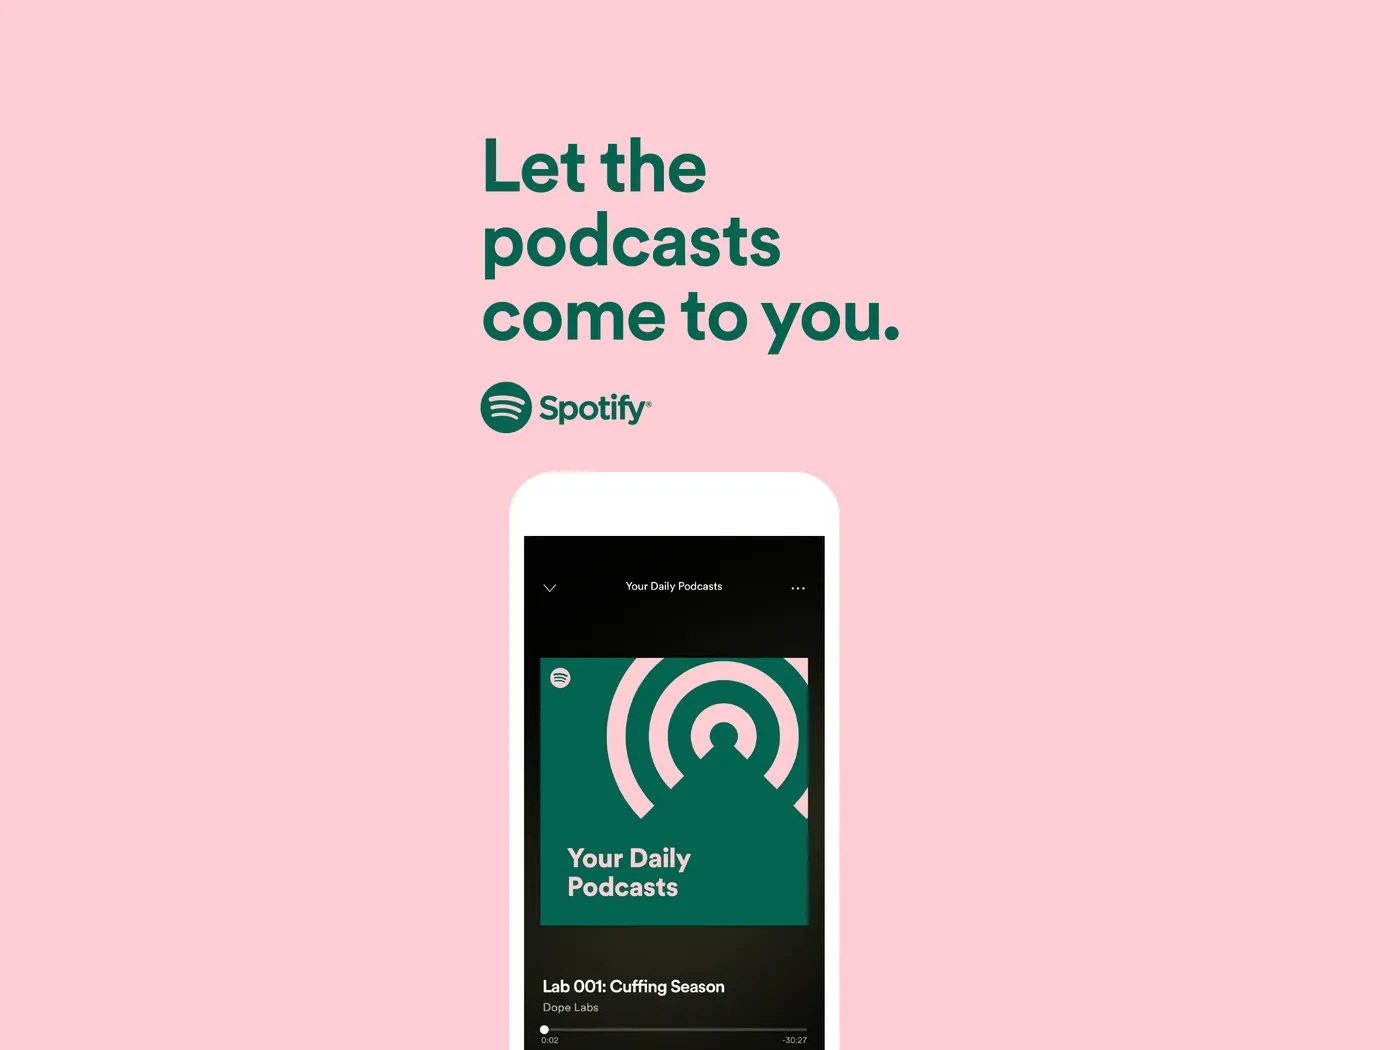 Spotify signifies a subscription podcast service